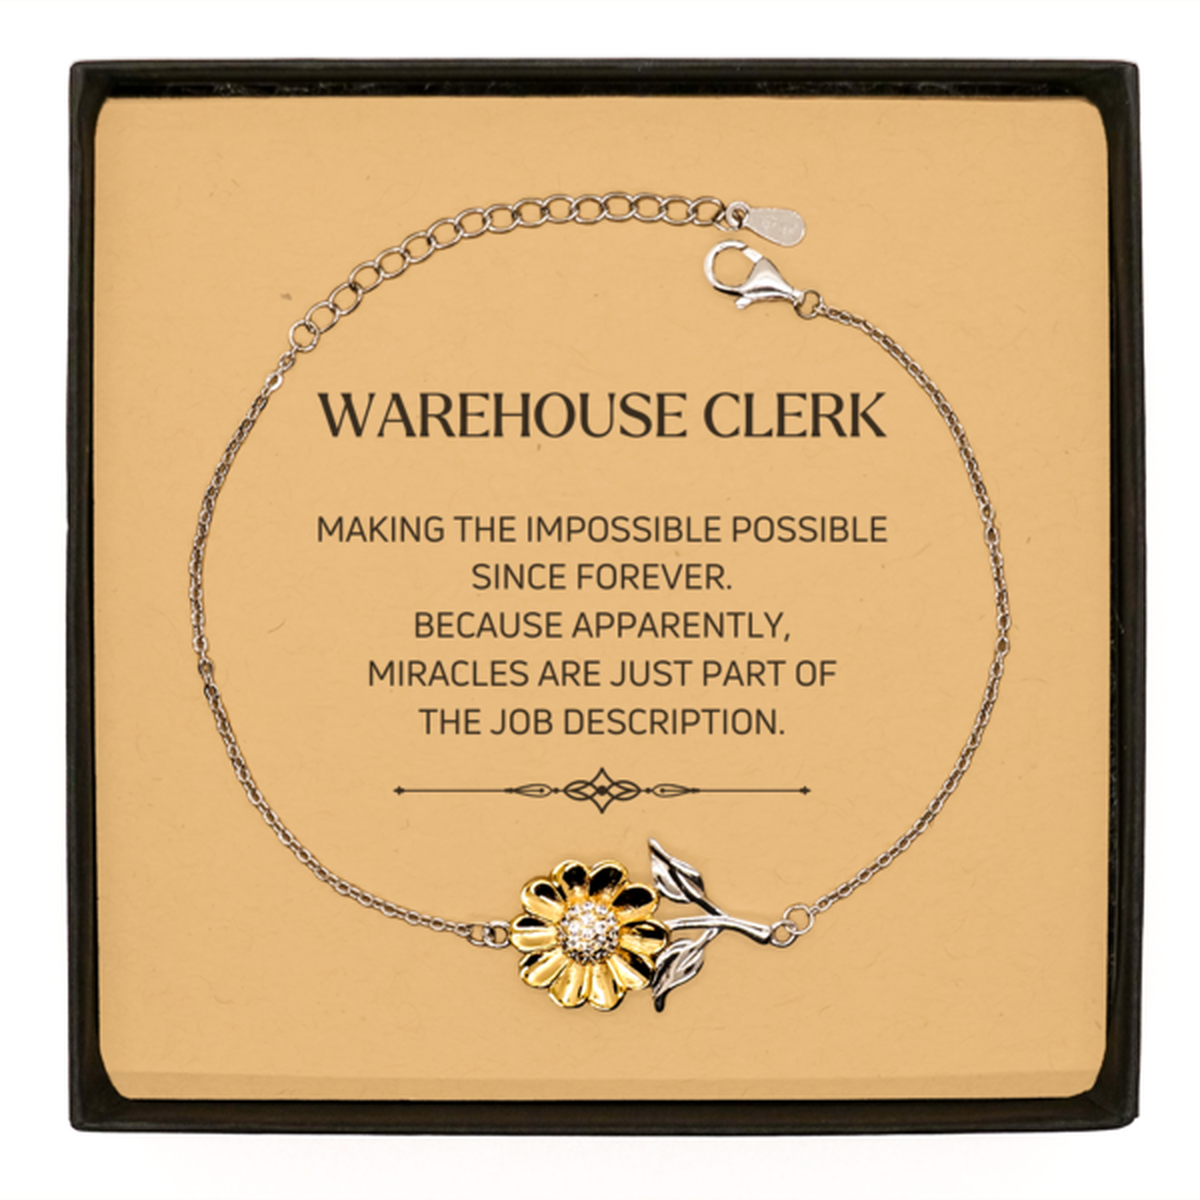 Funny Warehouse Clerk Gifts, Miracles are just part of the job description, Inspirational Birthday Sunflower Bracelet For Warehouse Clerk, Men, Women, Coworkers, Friends, Boss